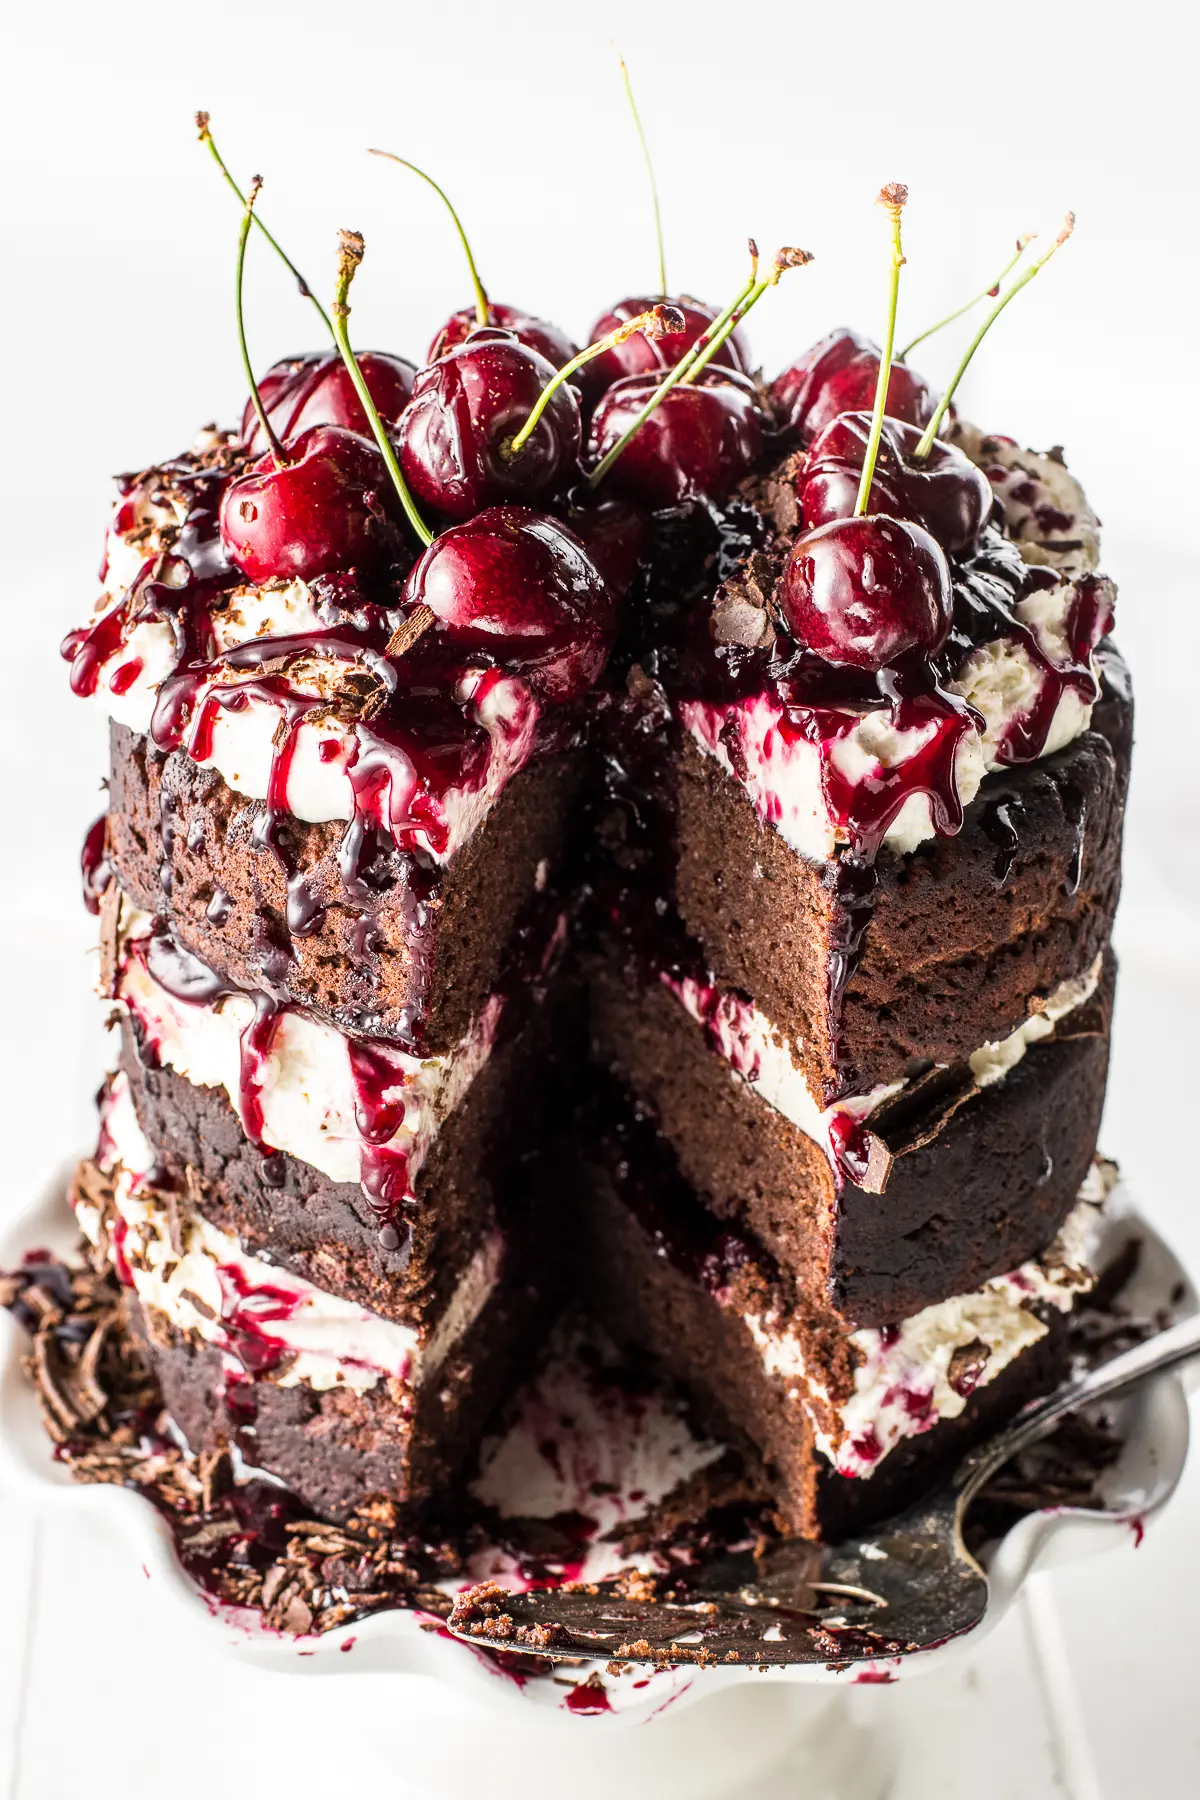 A gluten free black forest cake with a slice removed against a bright white background and wooden table